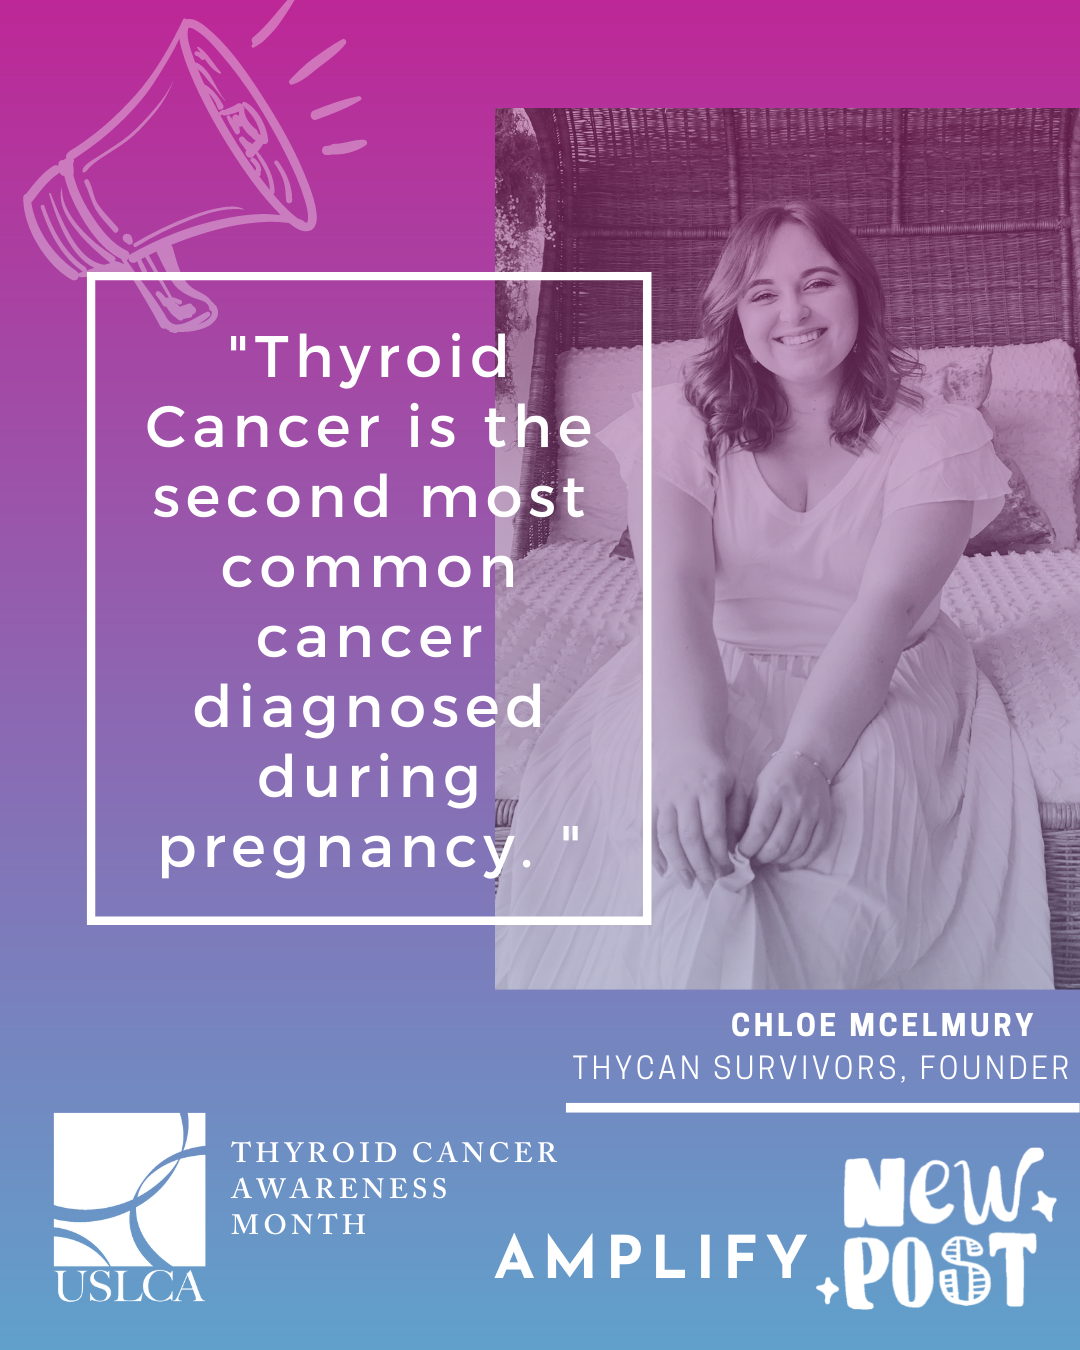 Thyroid Cancer Awareness Month